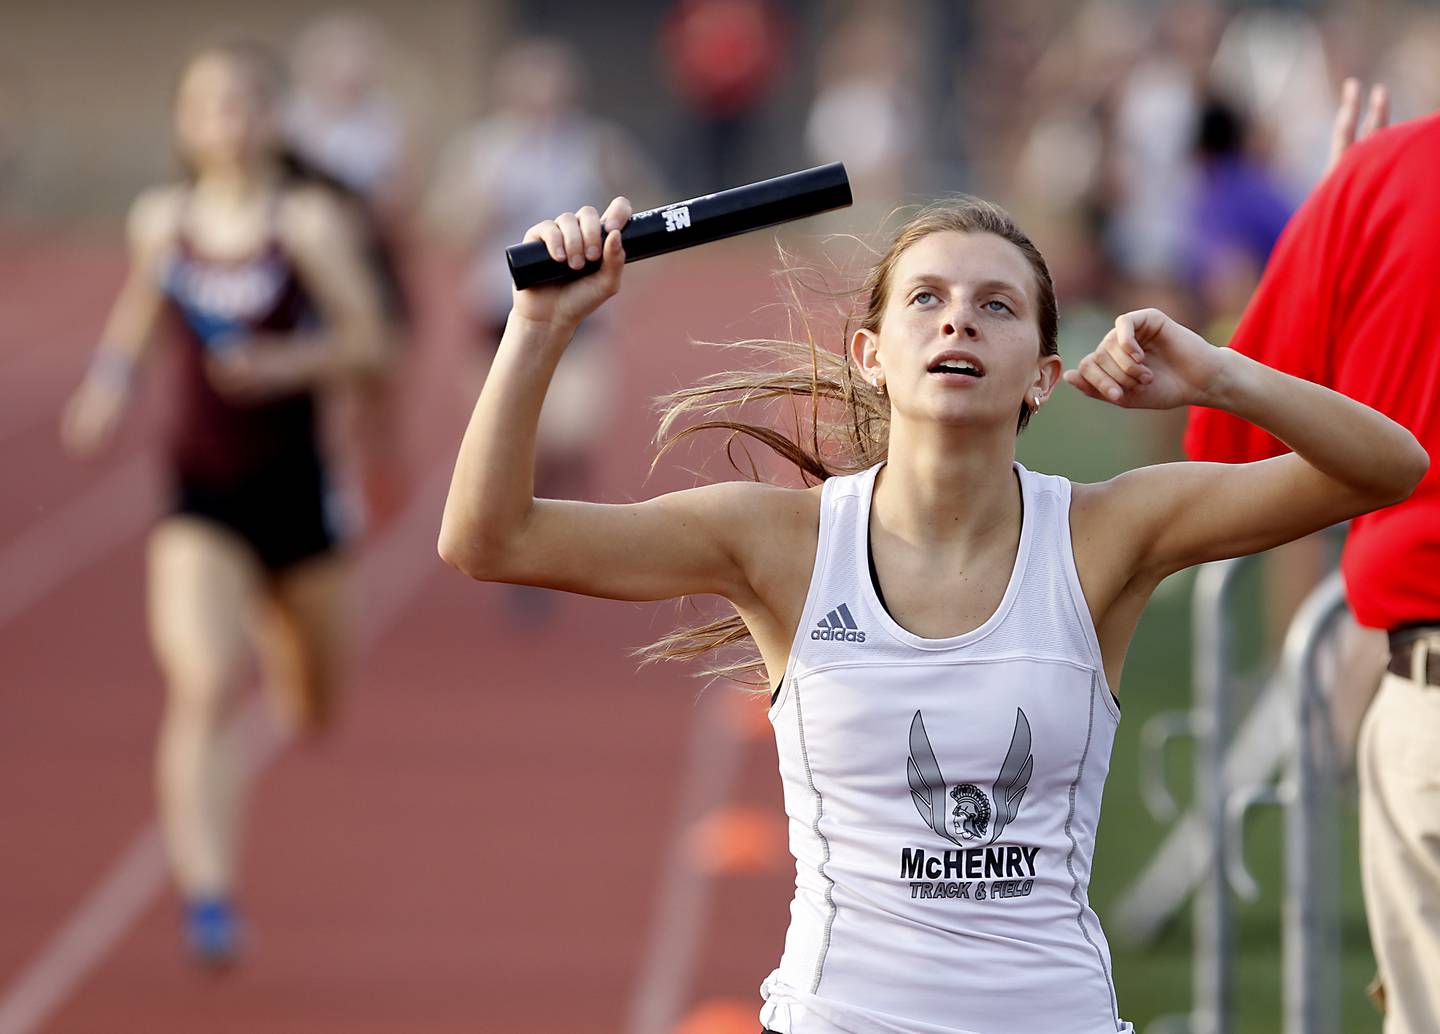 McHenry’s Alyssa Moore celebrates winning the 4x800 relay during the IHSA Class 3A Huntley Girls Track Sectional Wednesday, May 11, 2022, at Huntley High School.